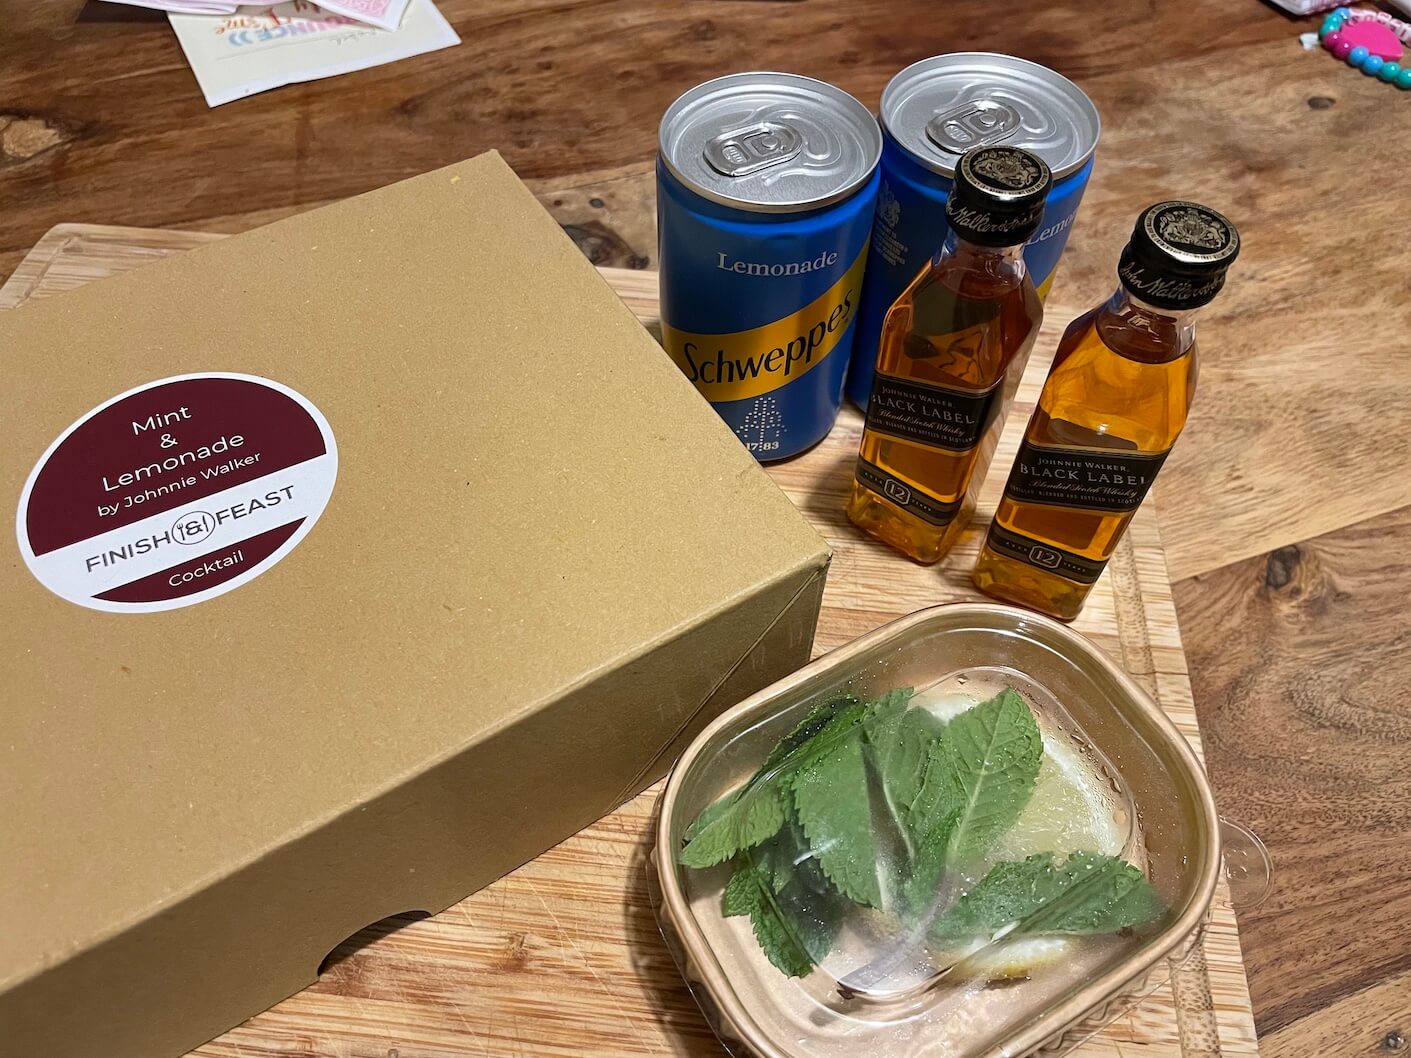 Tom Aikens Finish and Feast restaurant meal kit drink whisky cocktail